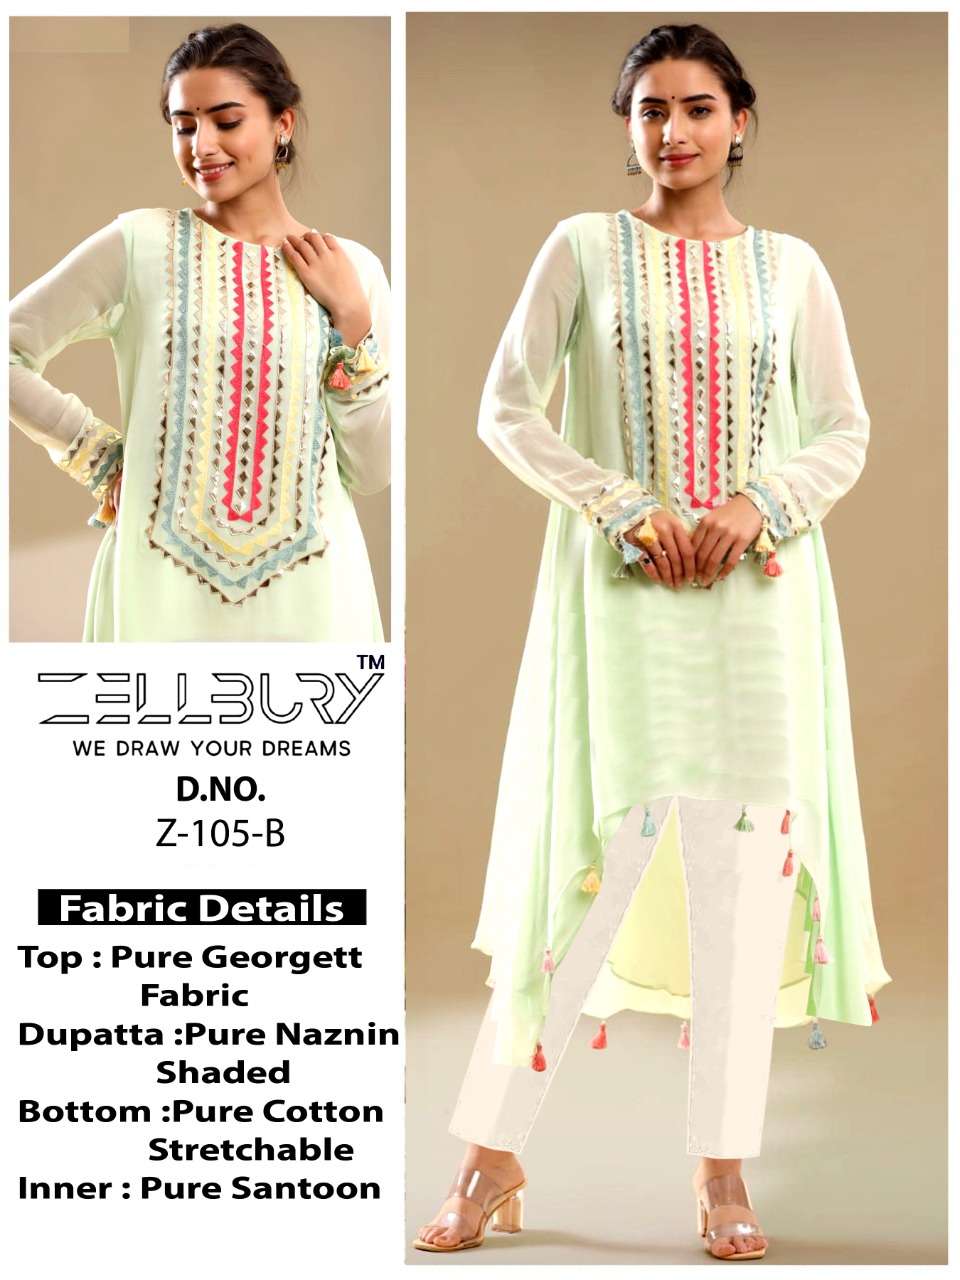  FESTIVE COLLACTION BY ZELLBURY BRAND - GEORGETTE DESIGNER EMBROIDERED TUNIC WITH SANTTON INNER WITH...